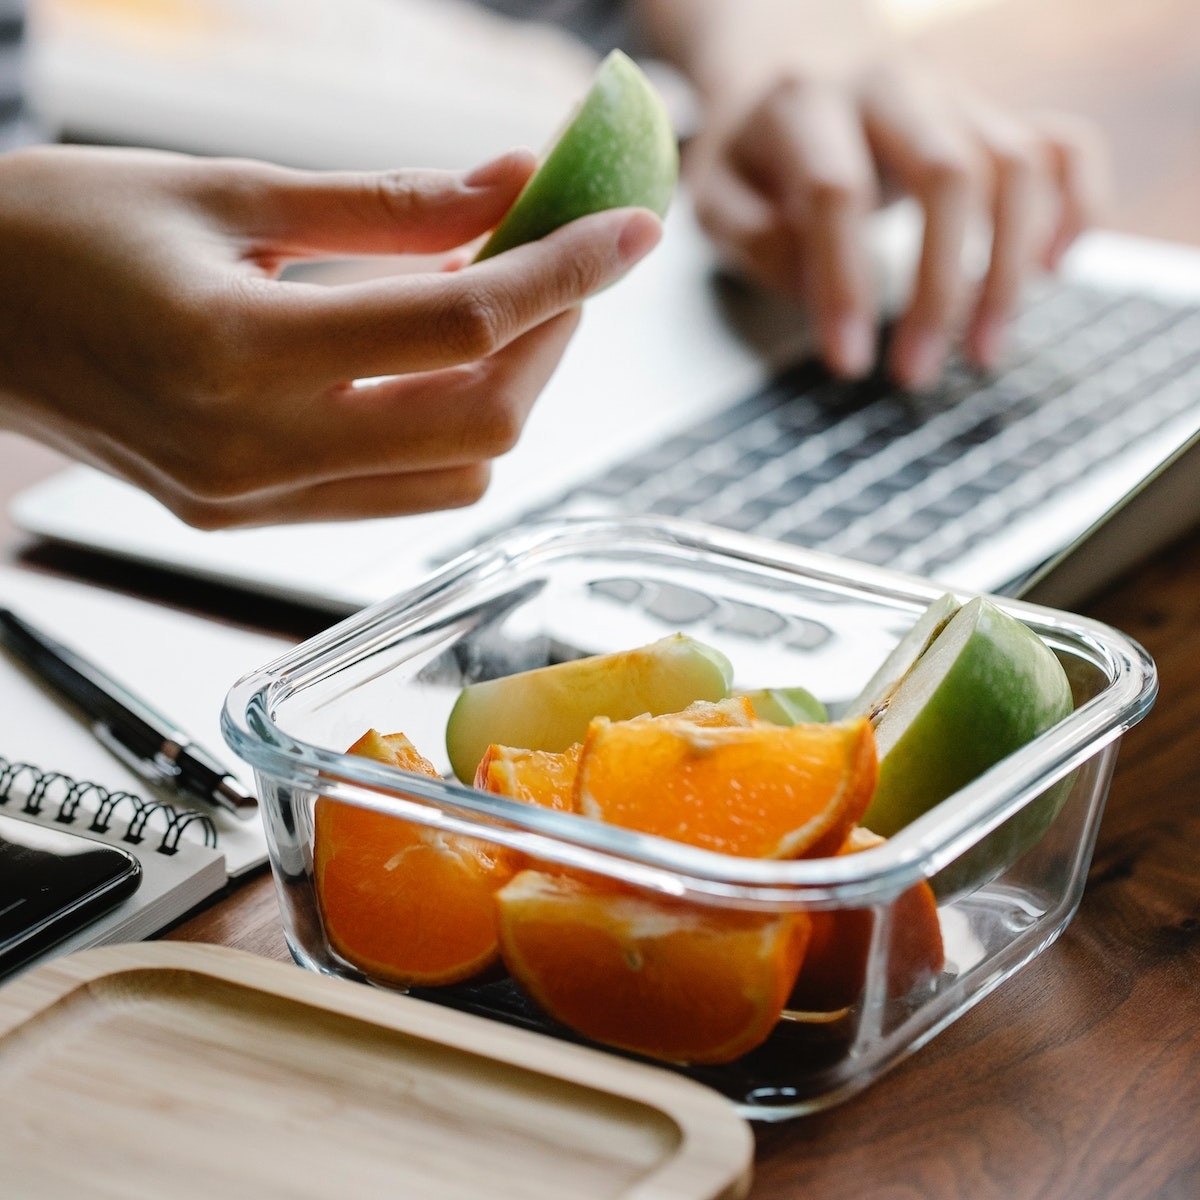 Person eating oranges and apples from a container, while using their laptop